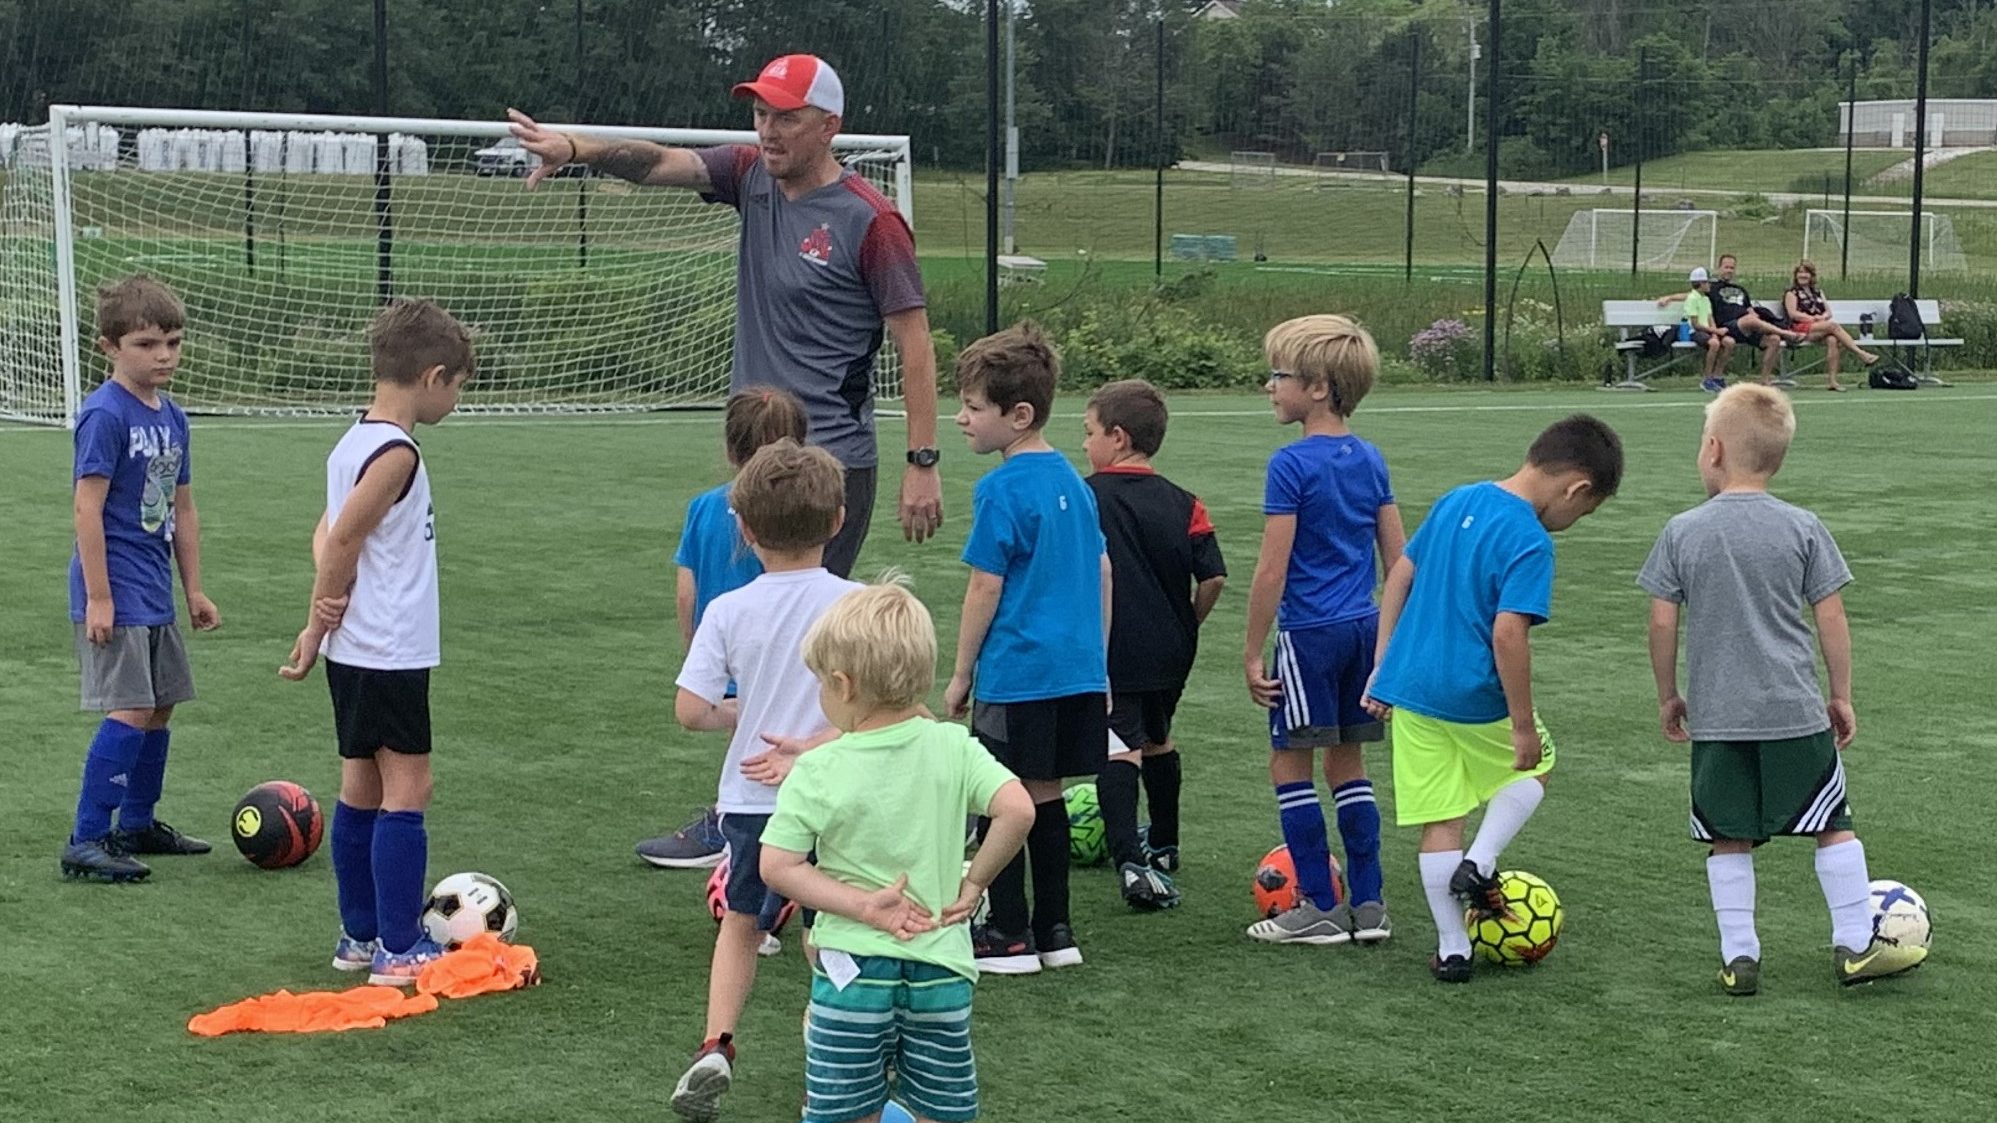 FC Wisconsin focused on developing youth soccer players in Germantown